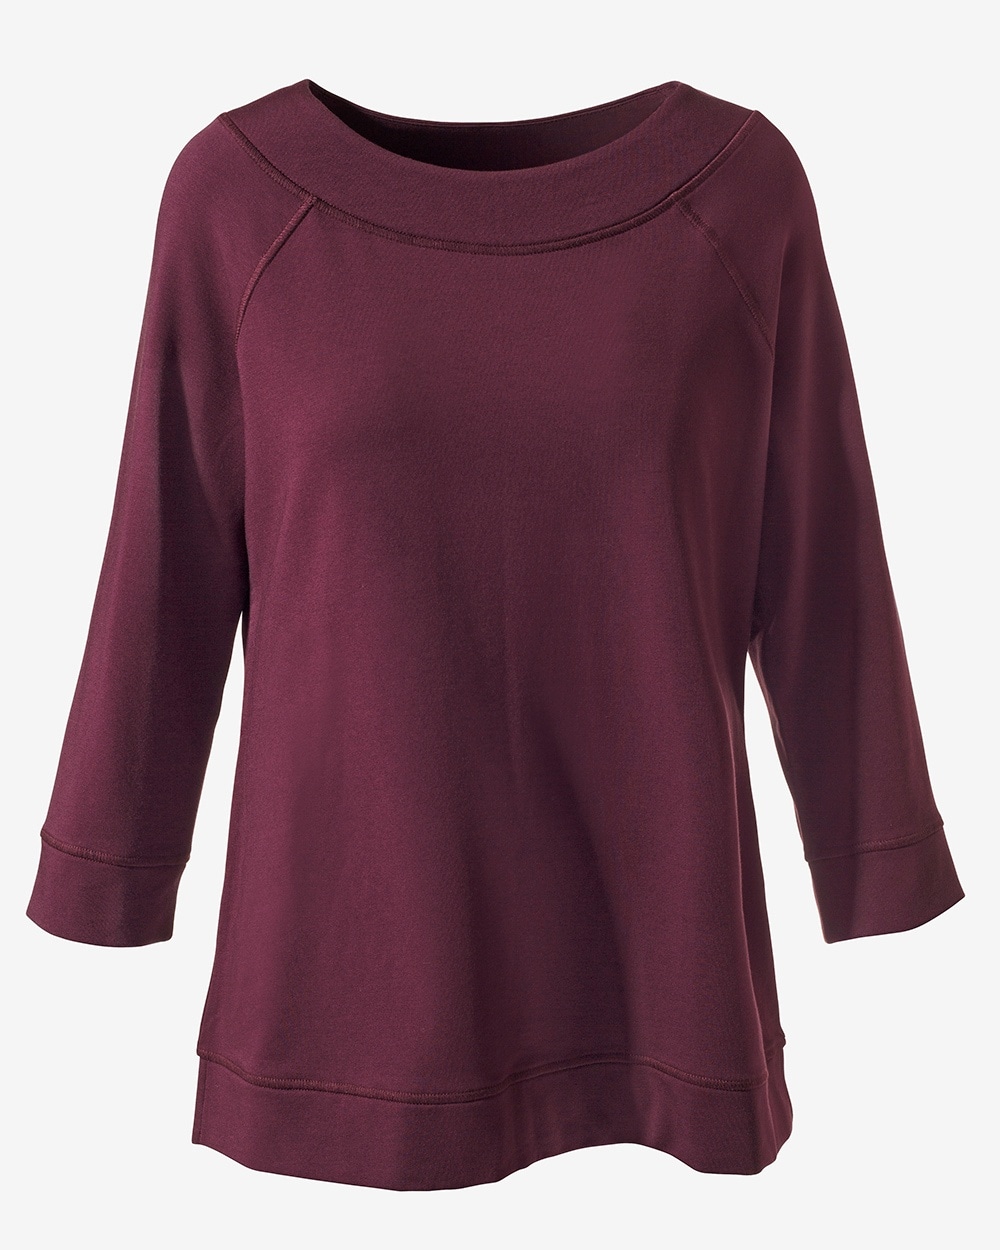 Weekends French Terry 3/4-Sleeve Tunic